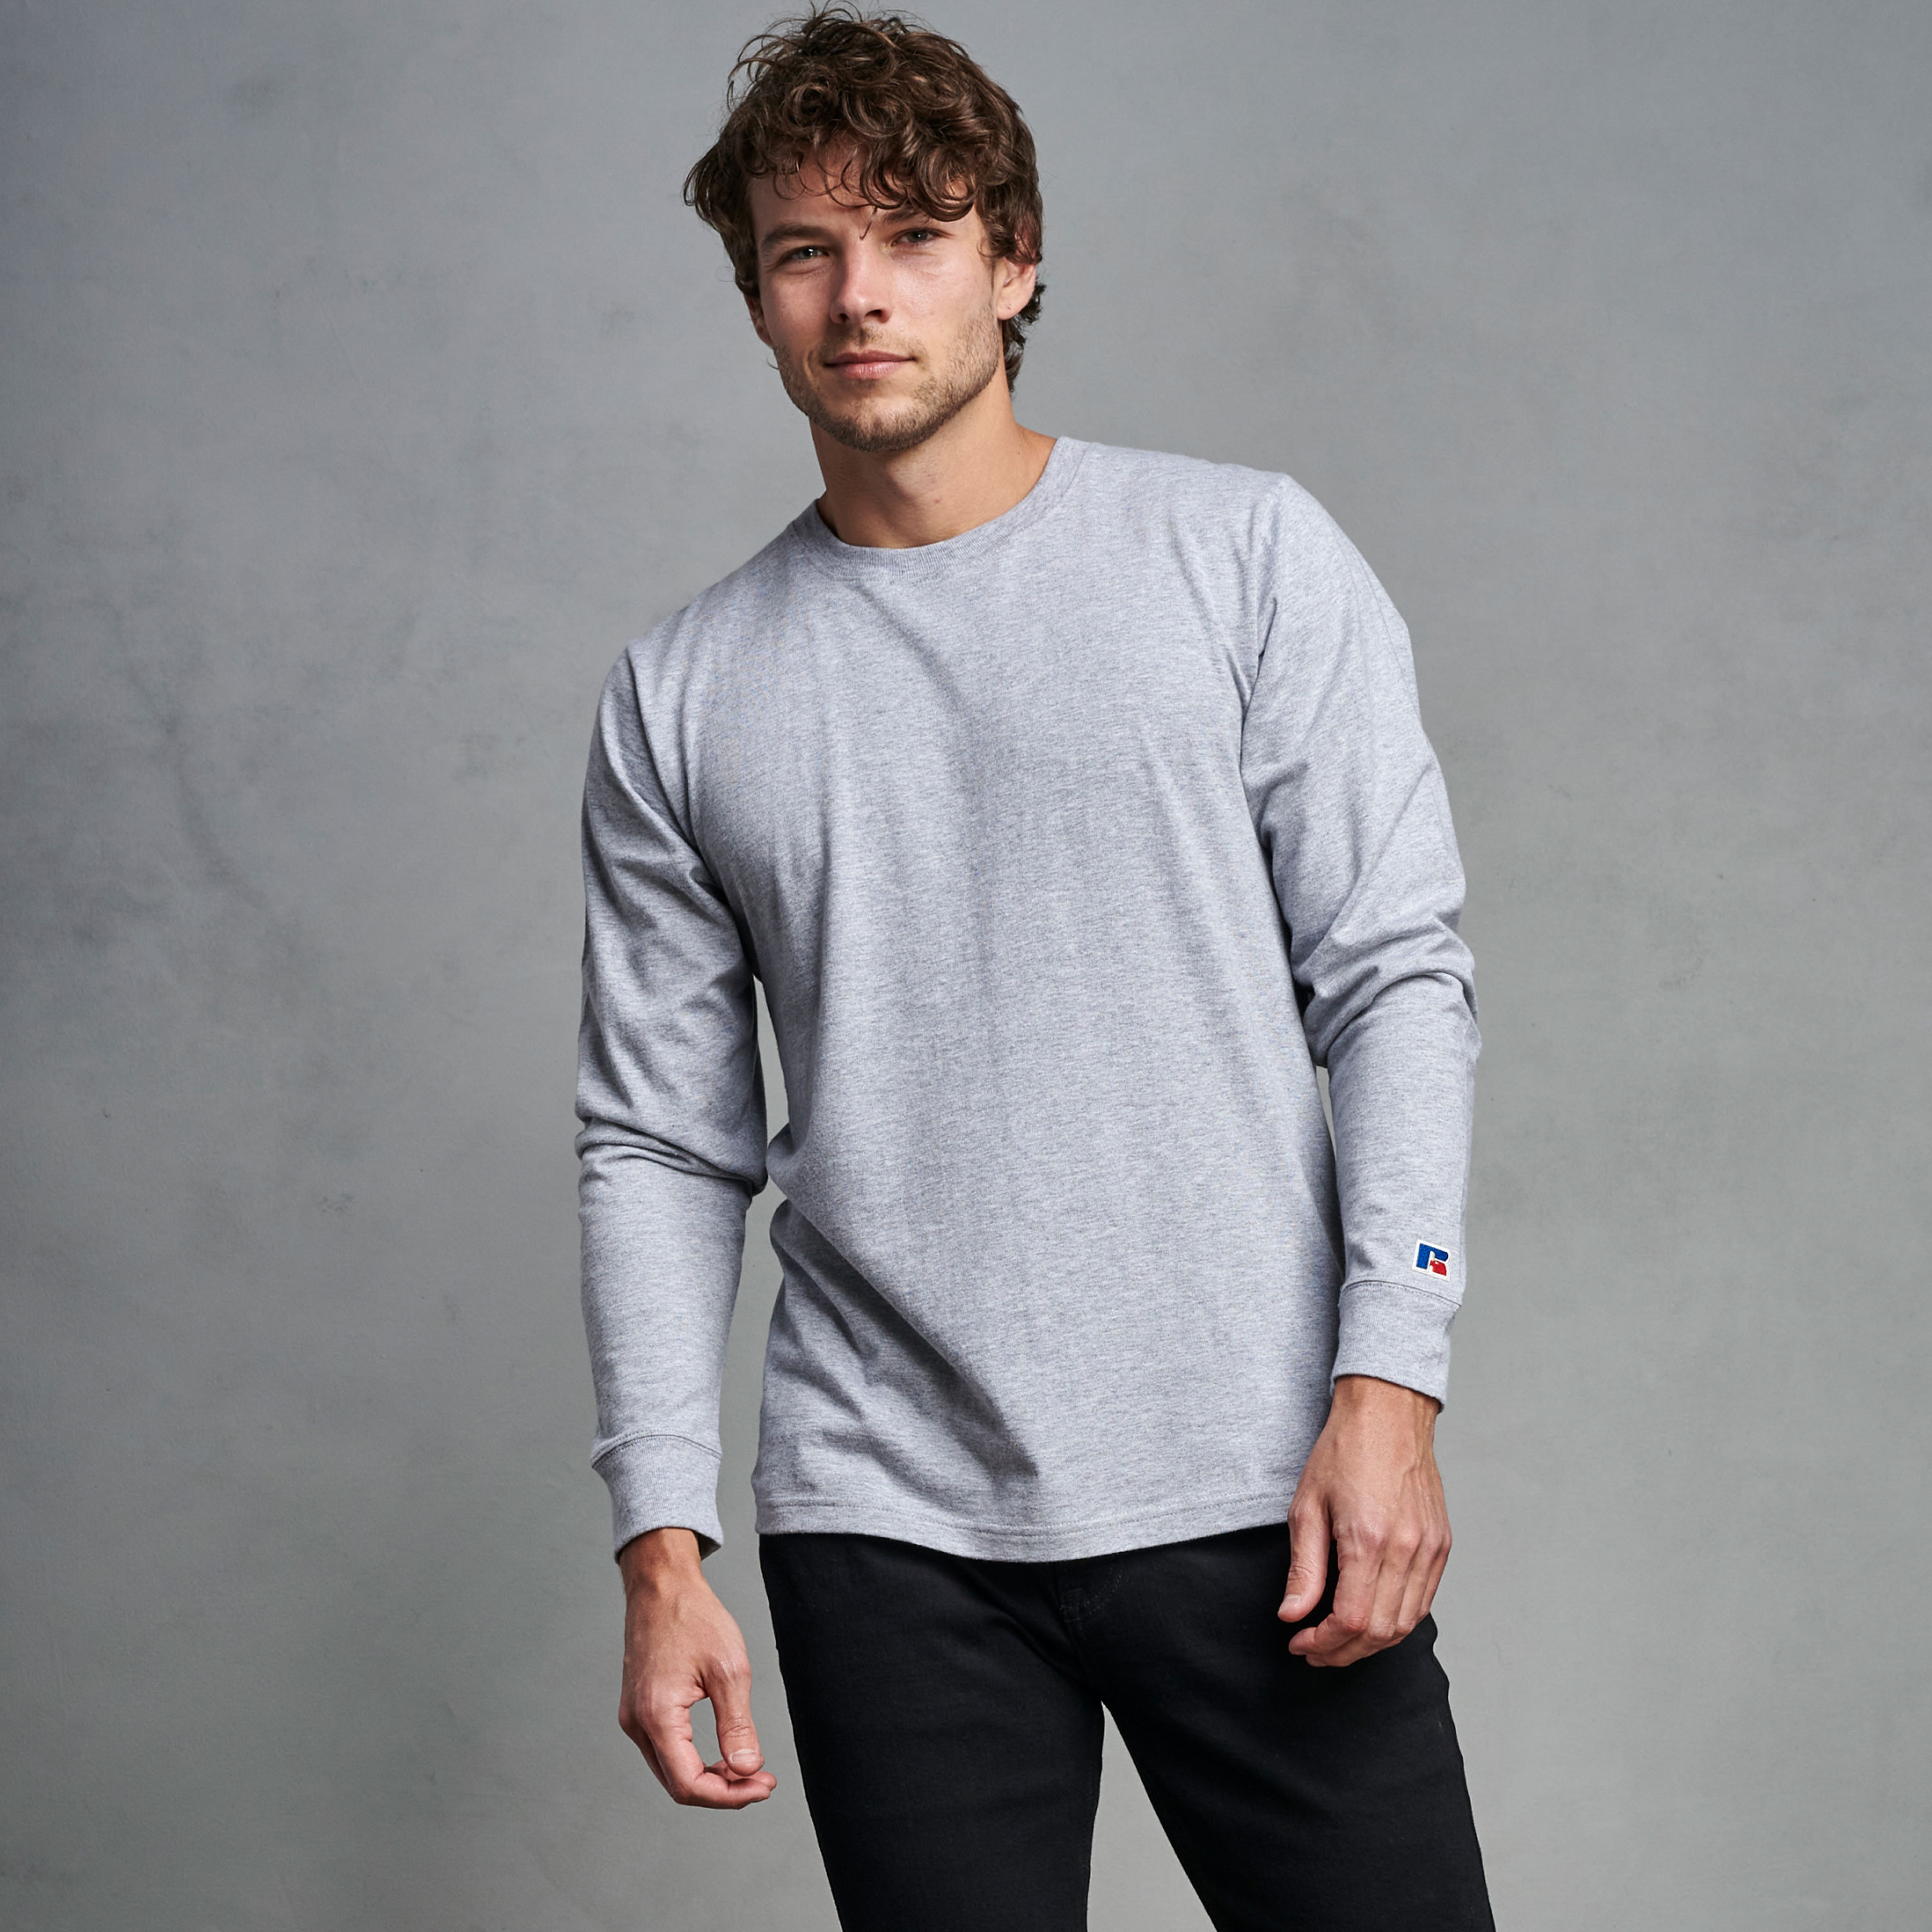 russell long sleeve